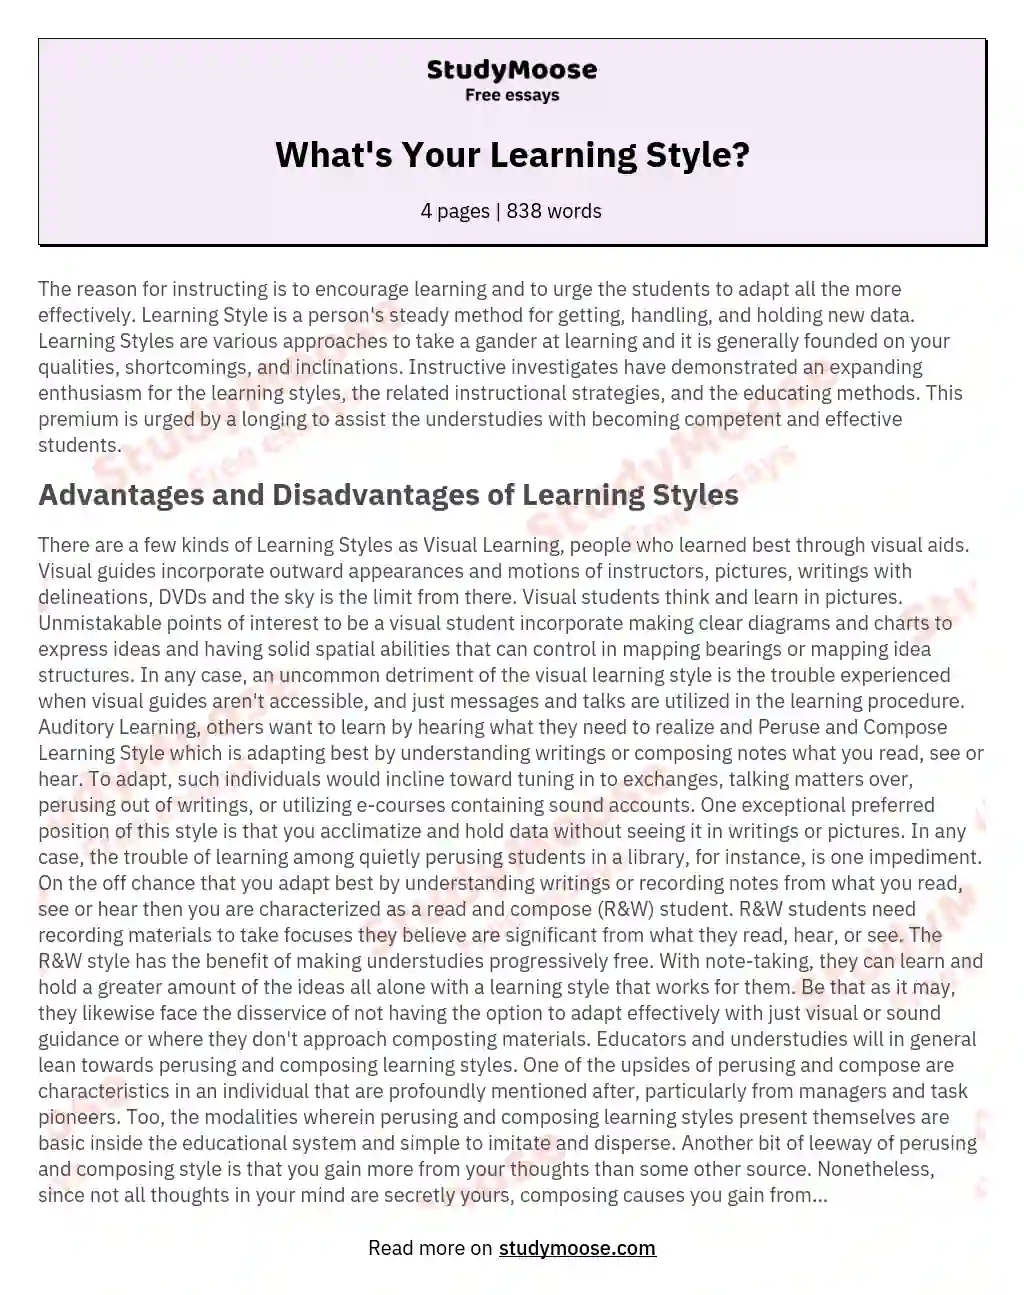 What's Your Learning Style? essay